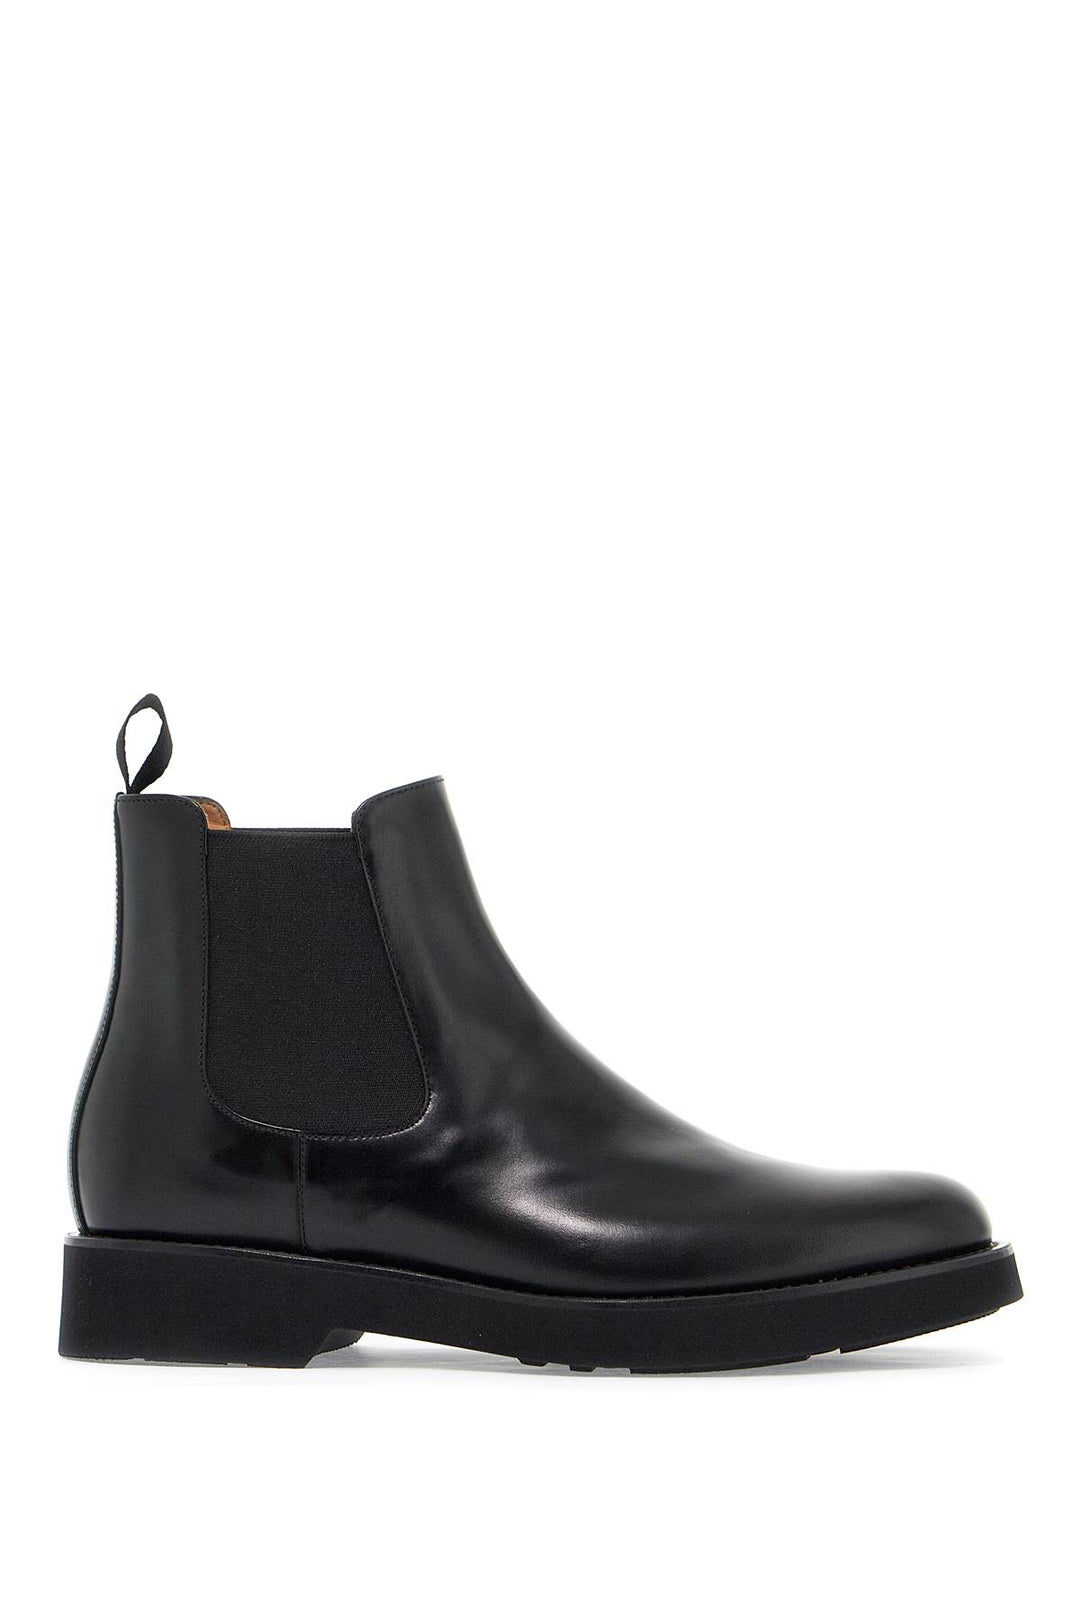 monmouth chelsea leather brushed ankle boots-0